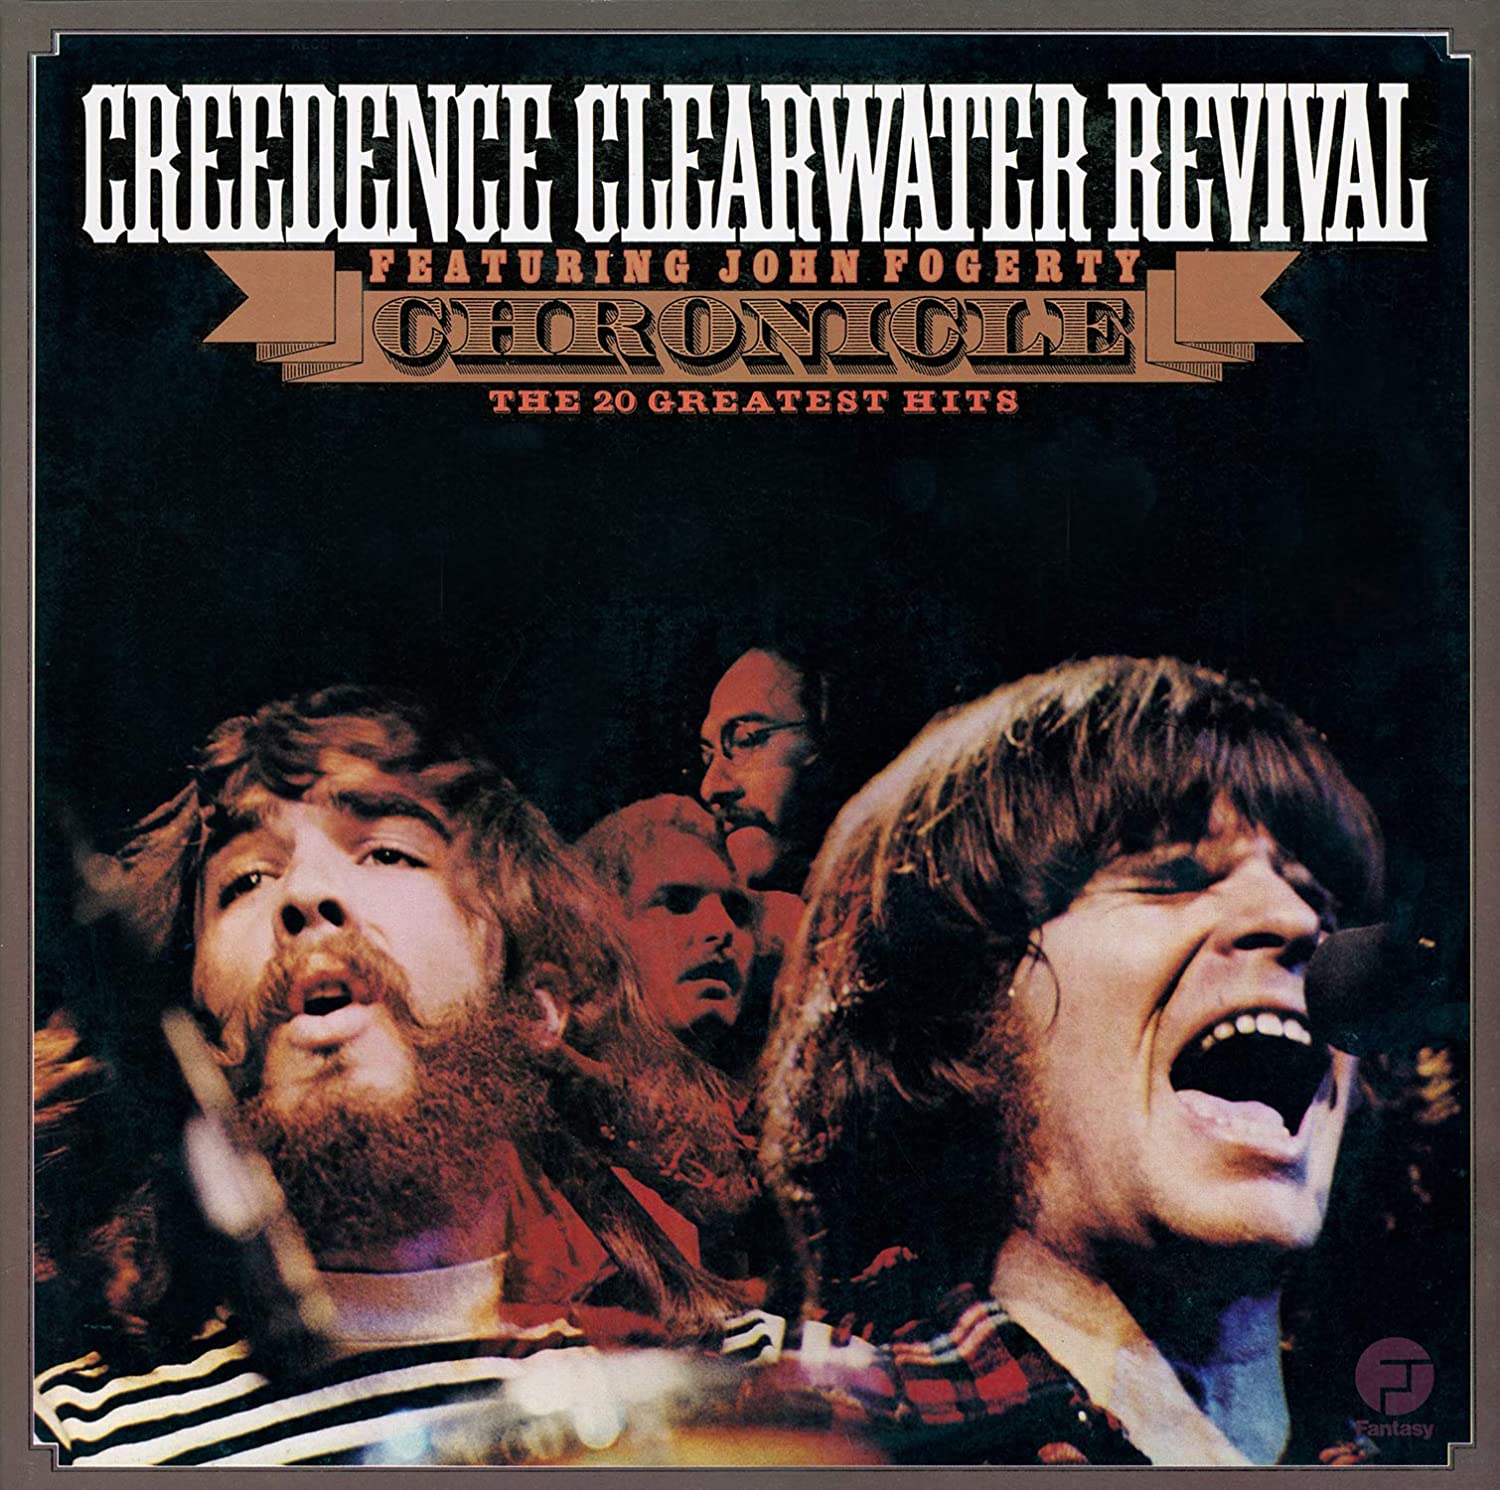 Chronicle: The 20 Greatest Hits | Creedence Clearwater Revival carturesti.ro poza noua